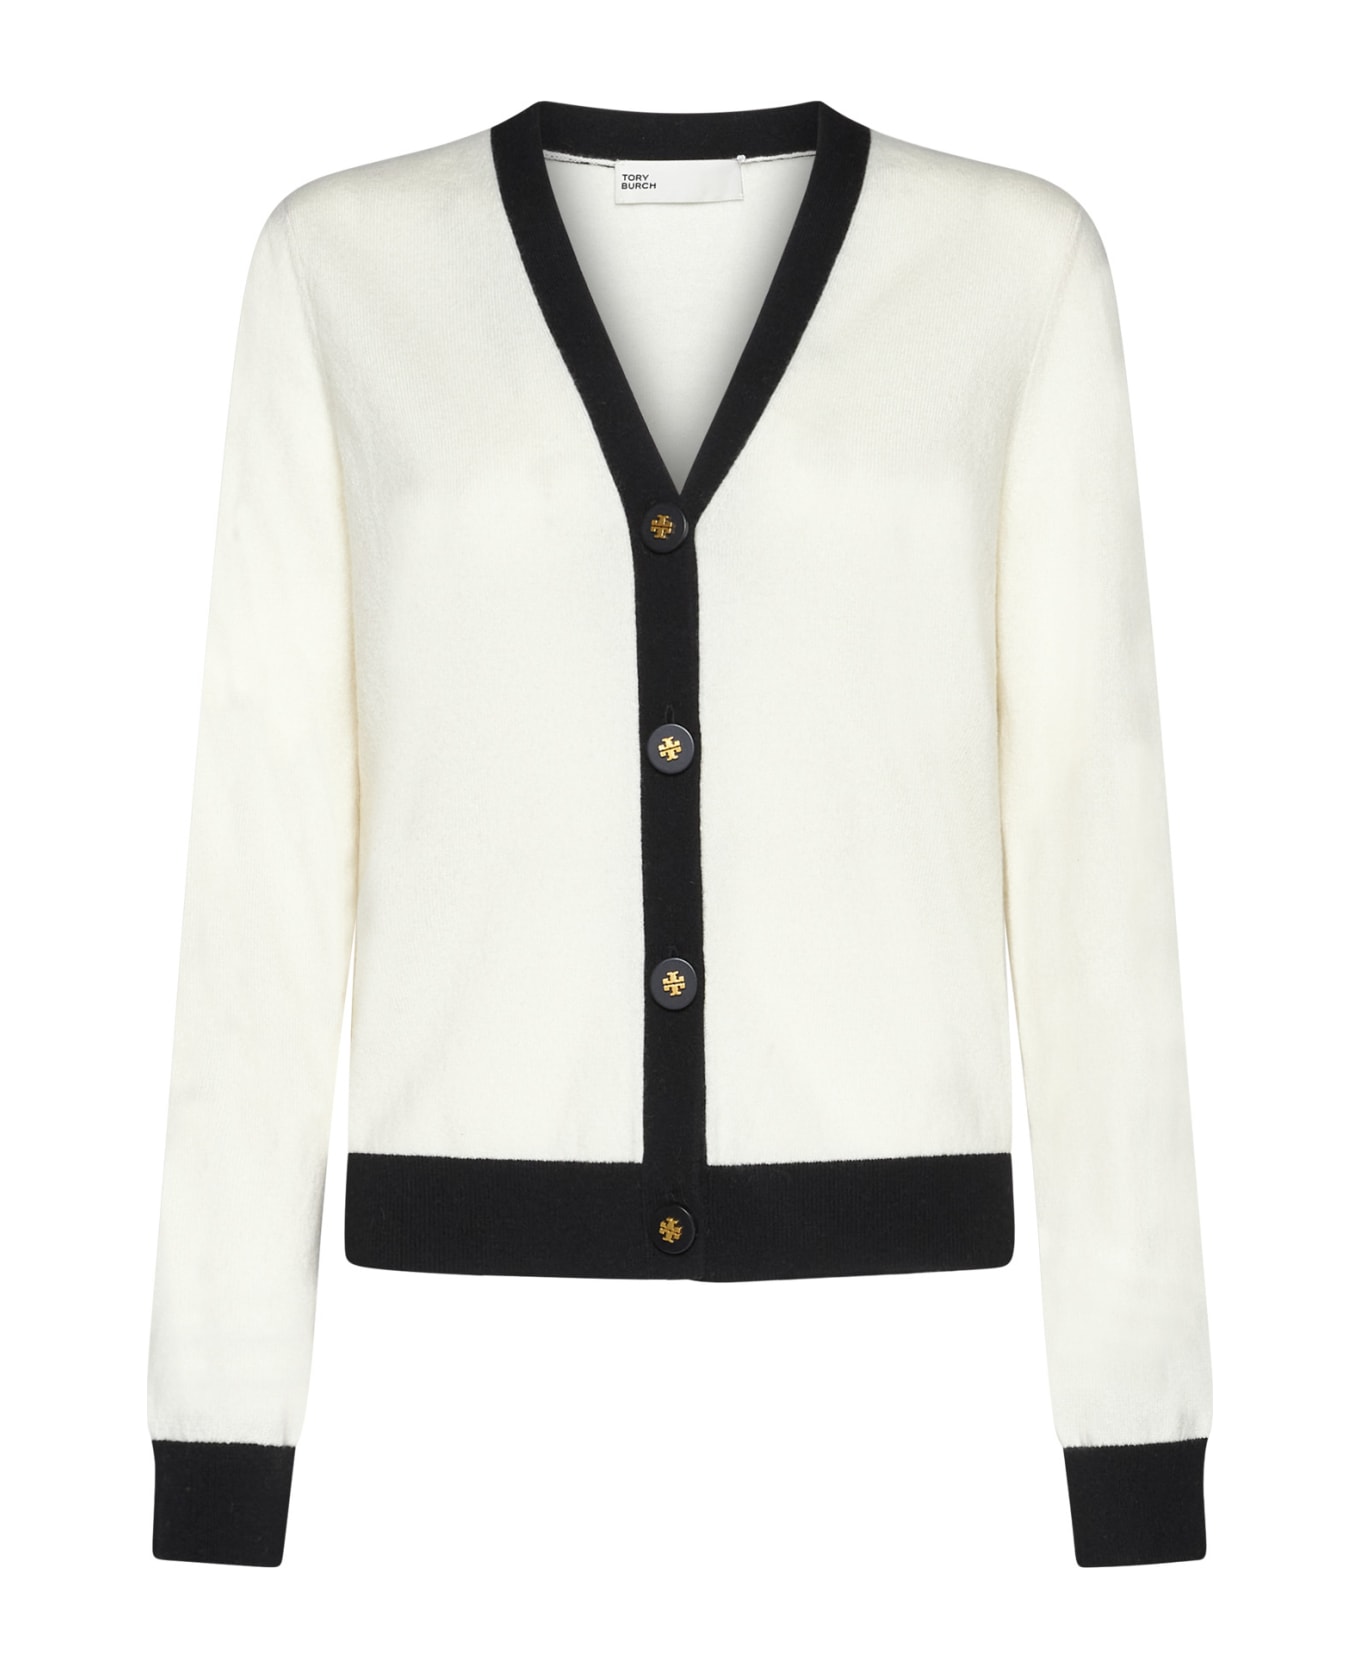 Tory Burch Cardigan With Contrasting Finish - Soft ivory black